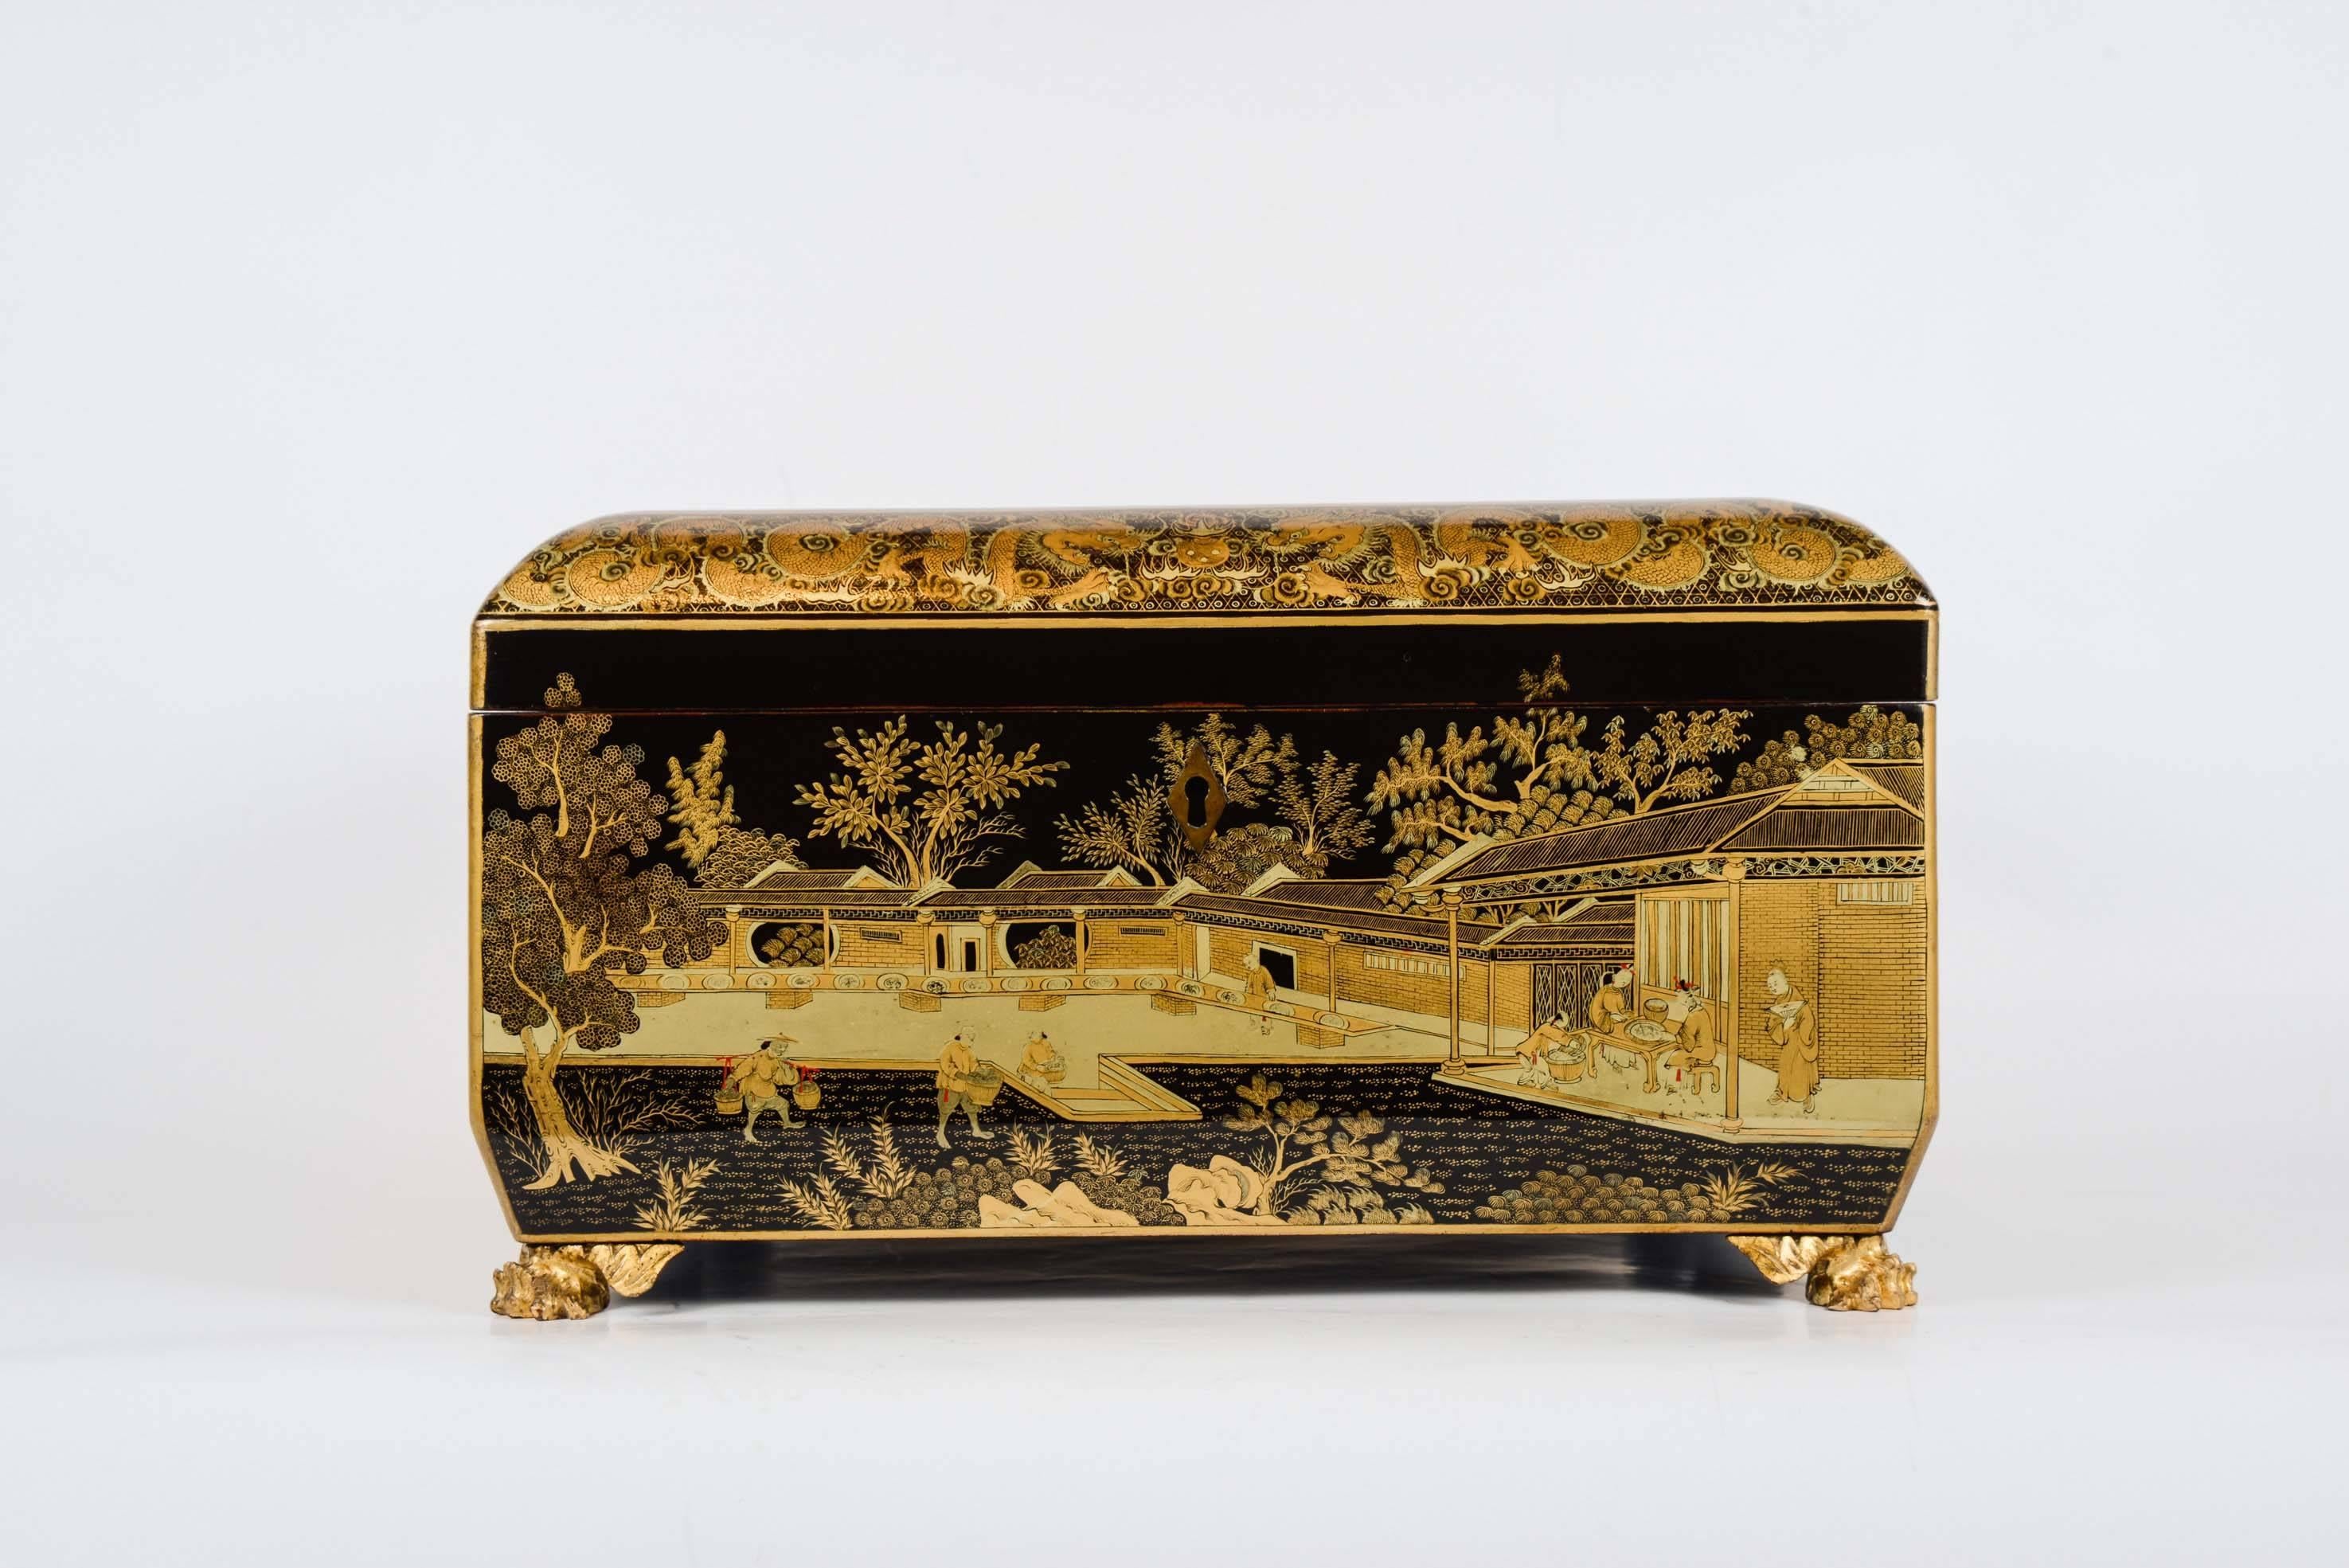 Large cabinet in canton black lacquer with gold scenes of domestic life in homes and landscapes. Very beautiful and rich decor. Dragon decor border. Black lacquer interior. The box rests on four carved and gilded feet. Copper keyhole and carrying